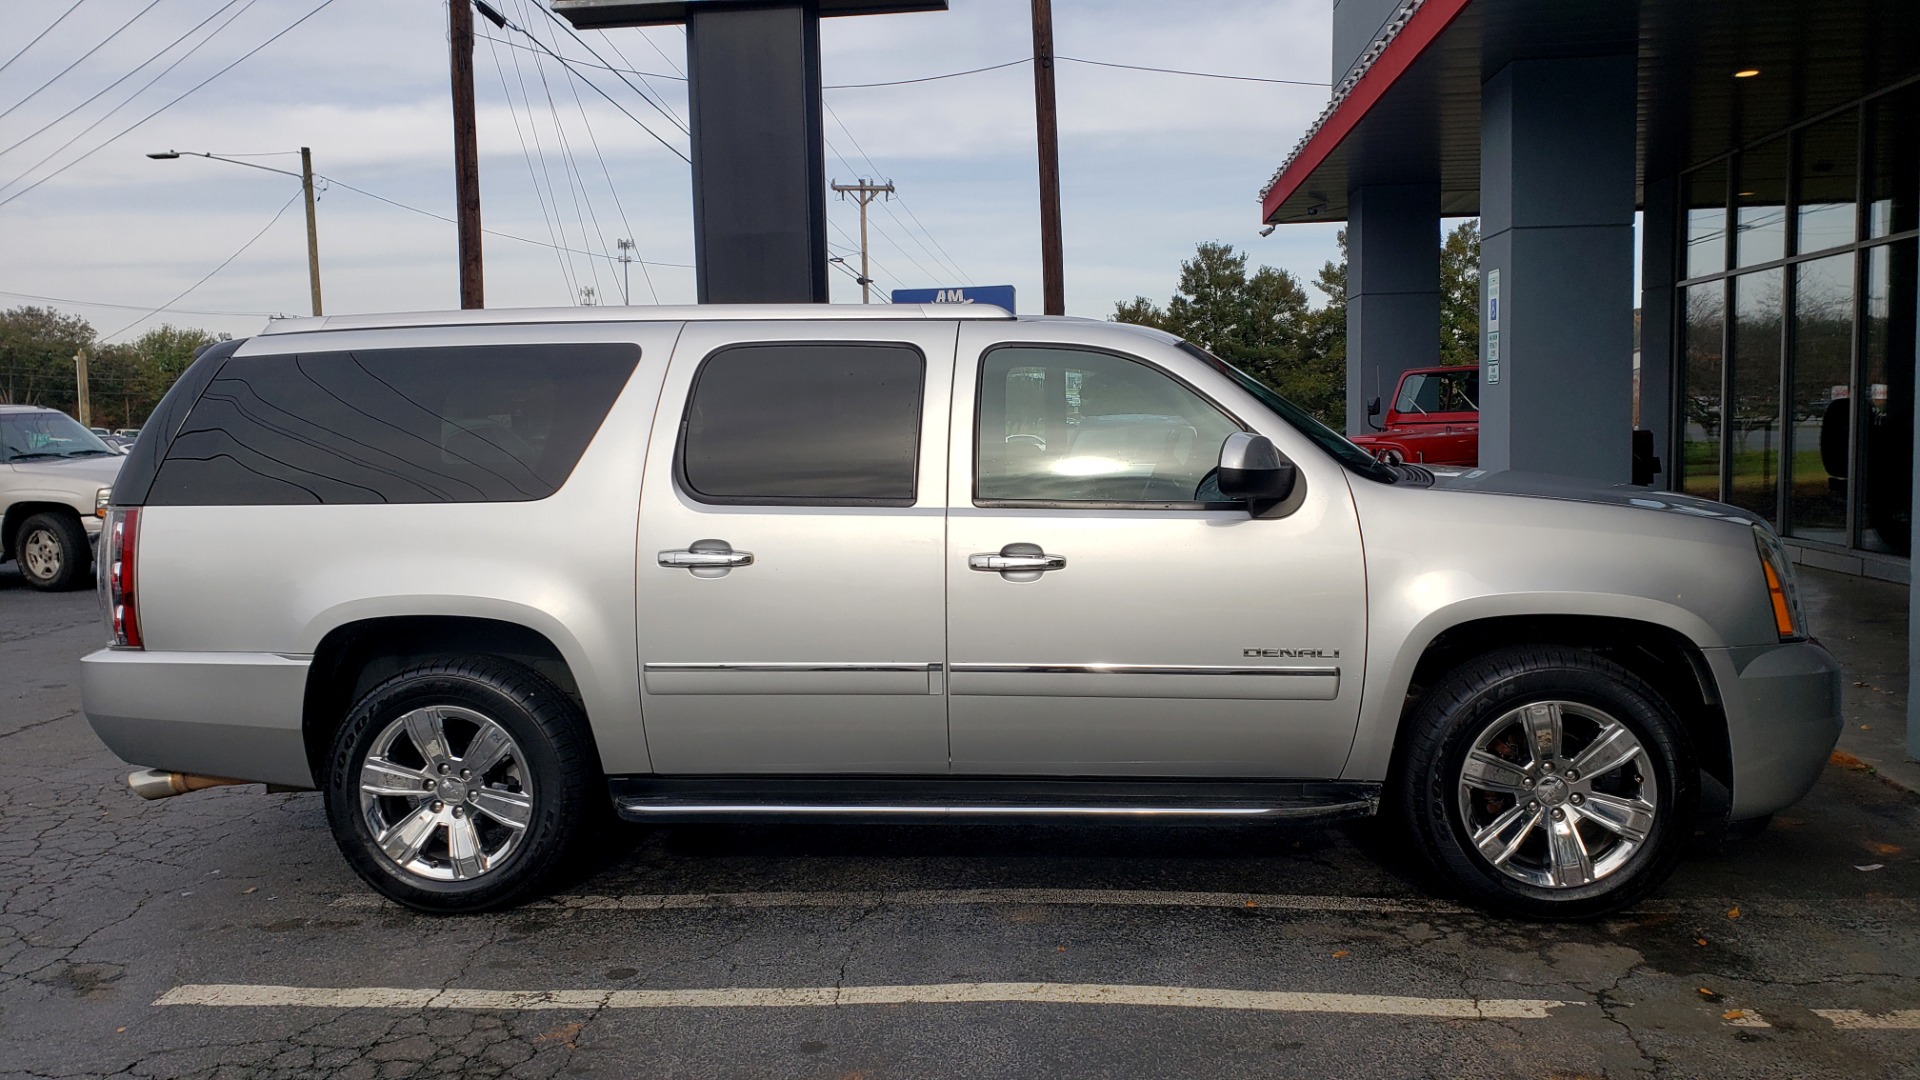 Used 2014 GMC YUKON XL DENALI / 5.3L V8 / AWD / NAV / BOSE / SUNROOF / 3-ROW / REARVIEW for sale Sold at Formula Imports in Charlotte NC 28227 5